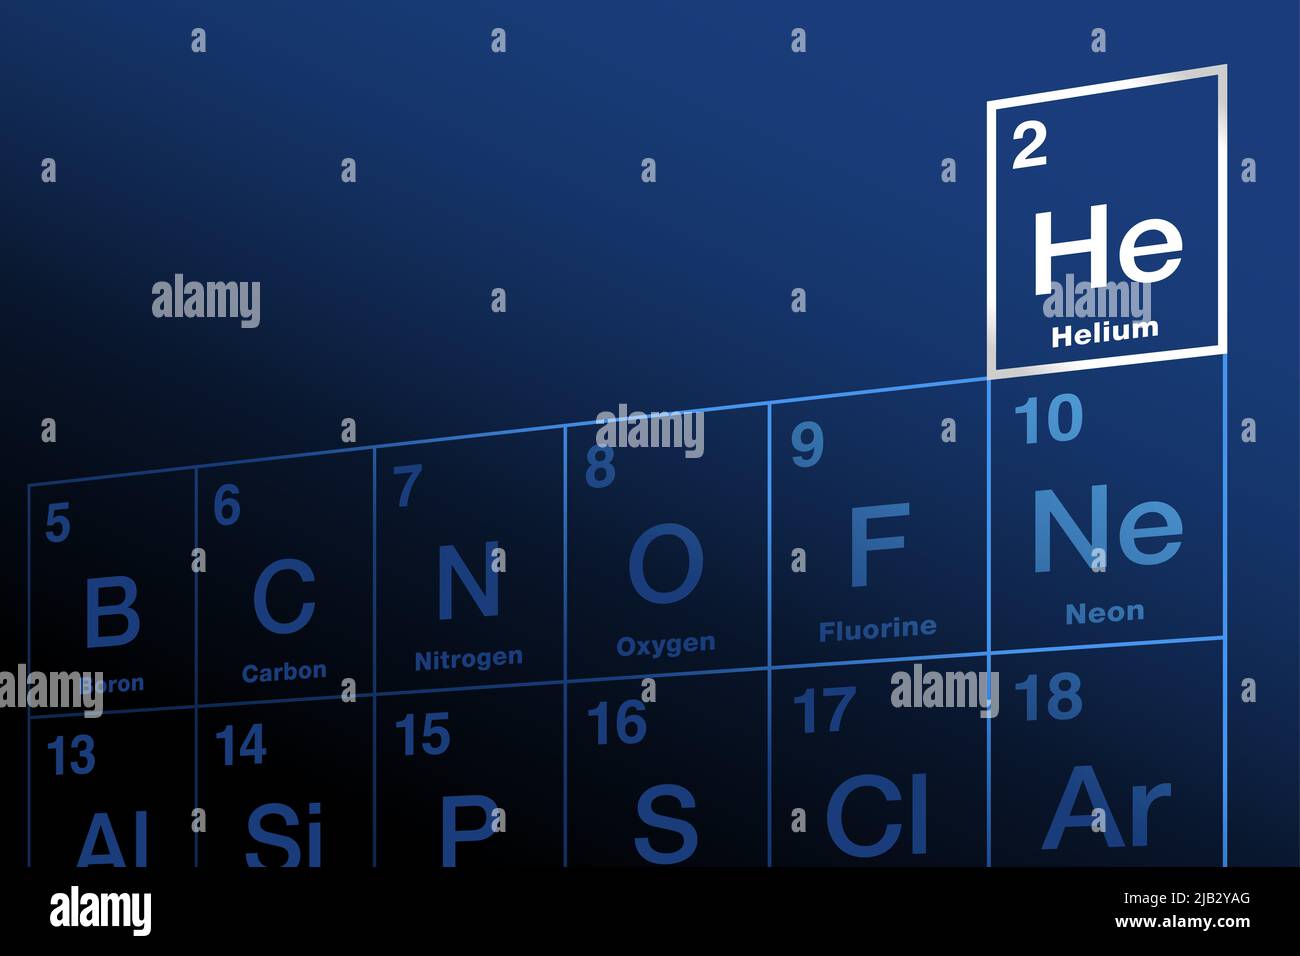 Helium on periodic table of the elements. Chemical element with symbol Al and atomic number 2. Inert, monatomic, noble gas. Stock Photo